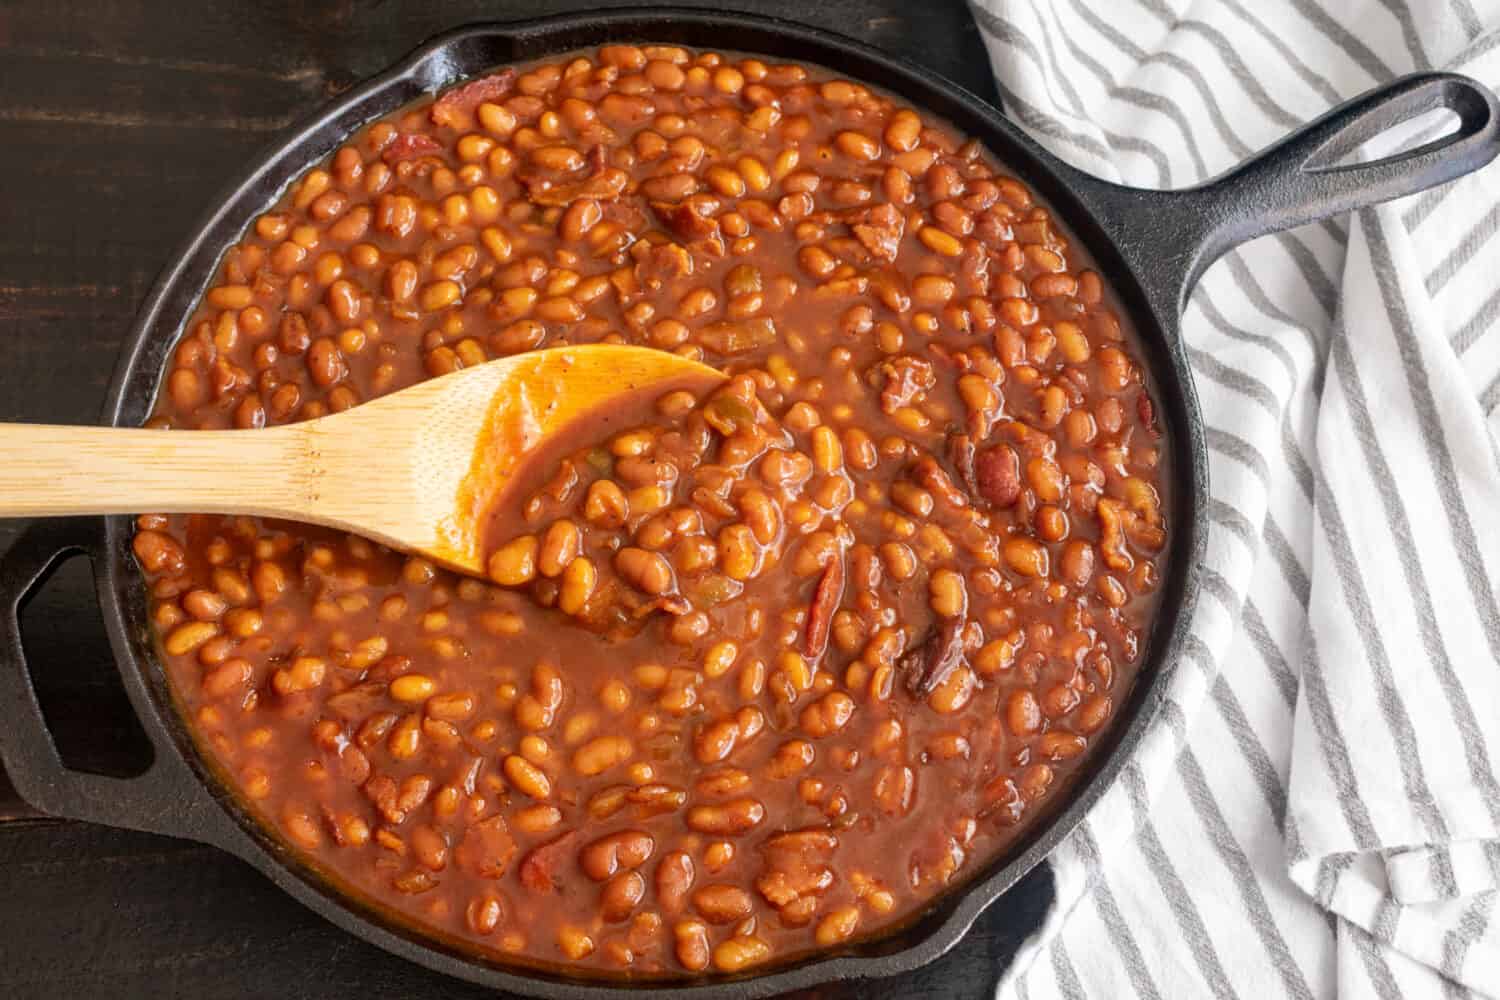 Bourbon Baked Beans in a Cast Iron Skillet: Pork and beans seasoned with bourbon whiskey, molasses, and brown sugar